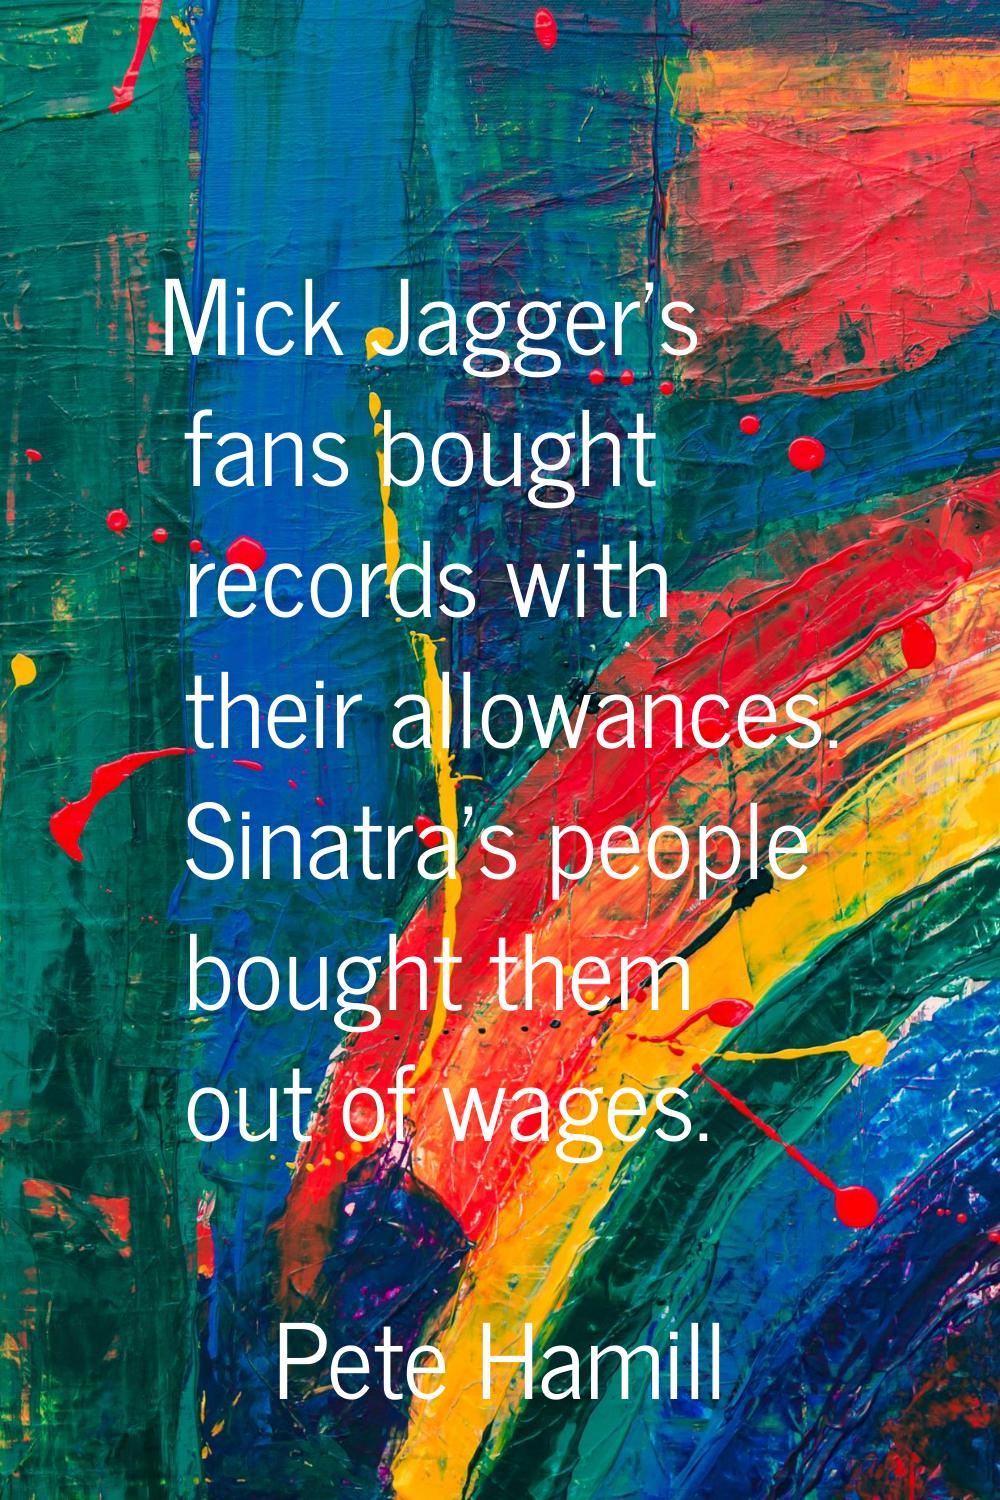 Mick Jagger's fans bought records with their allowances. Sinatra's people bought them out of wages.